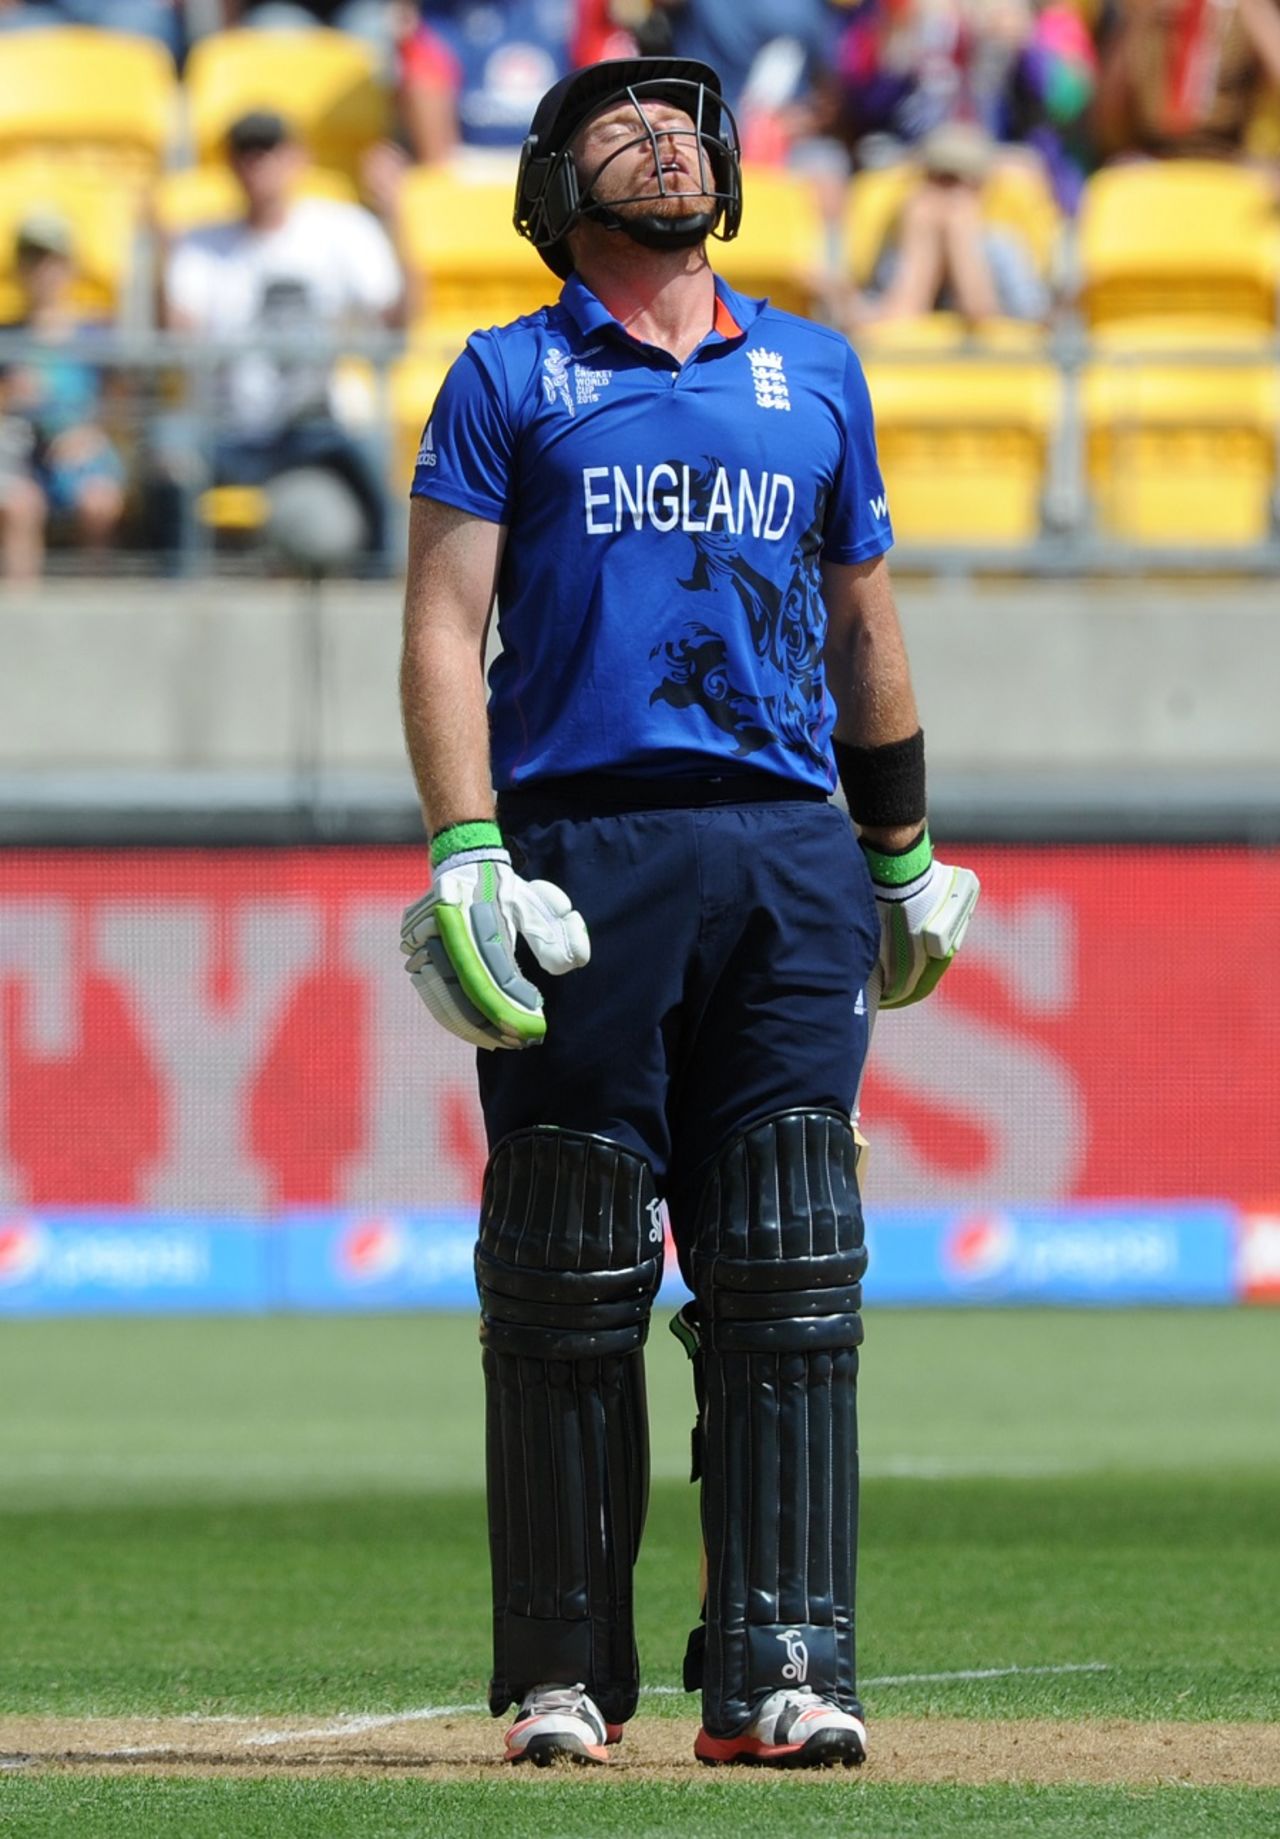 Ian Bell throws his head back in dejection after being dismissed on 49, England v Sri Lanka, World Cup 2015, Group A, Wellington, March 1, 2015